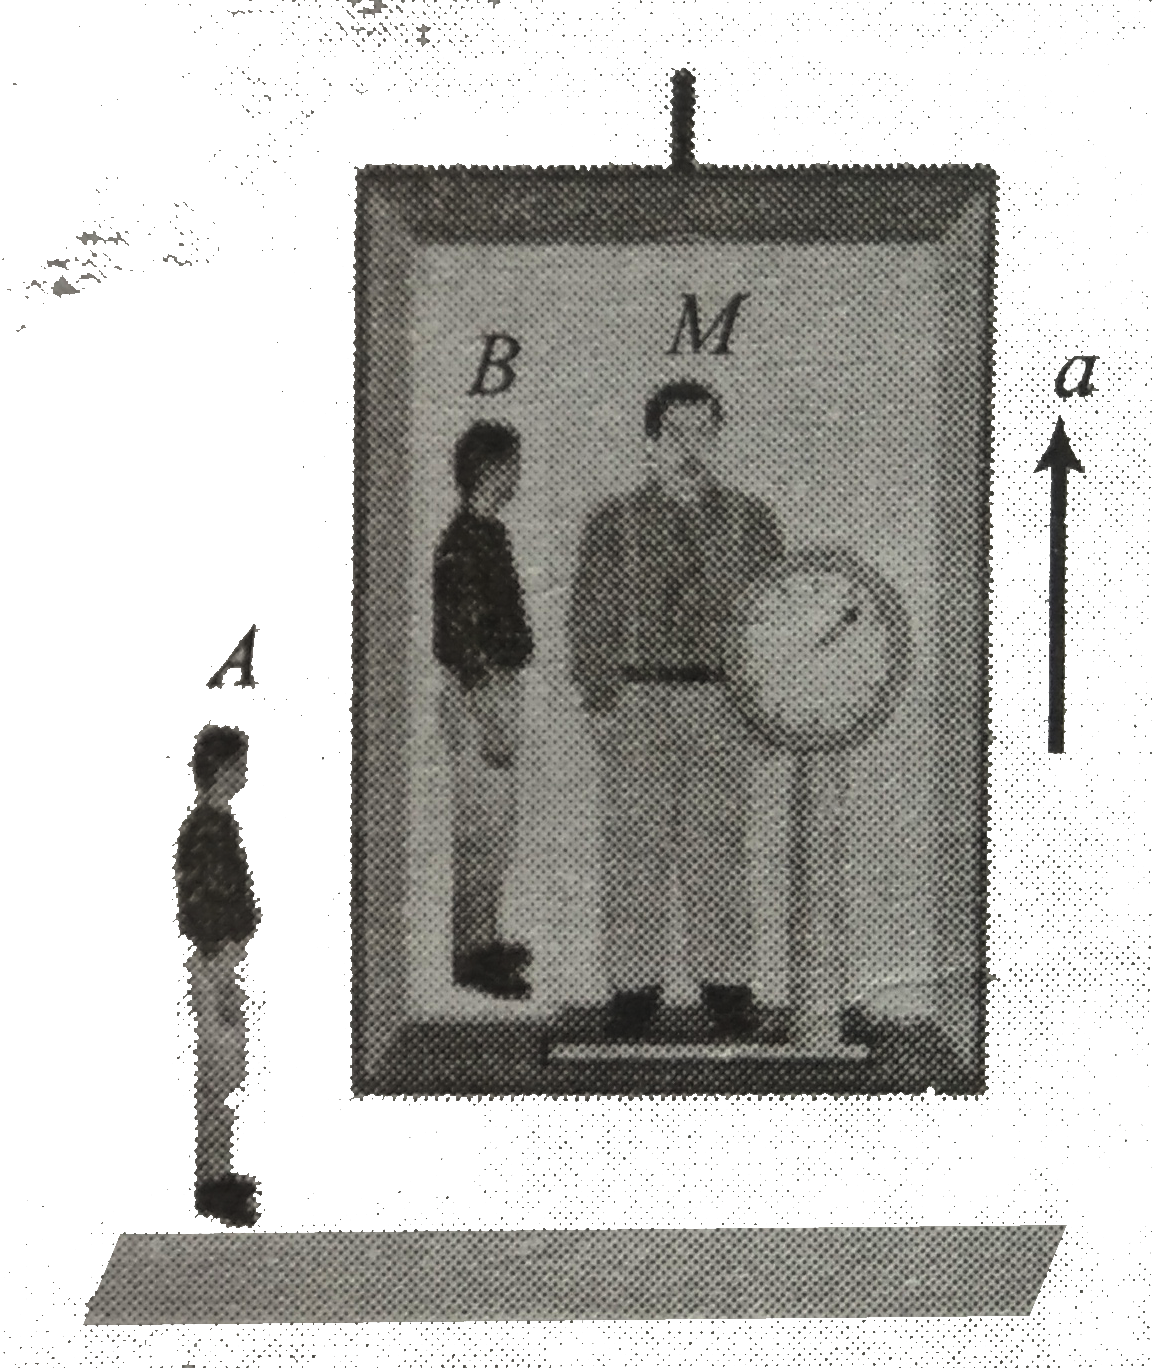 A man of mass M stands on a weighing machine in an elevator accelerating upwards with an acceleration a. Draw the free-body diagram of the man as observed by the observer A (stationary on the ground) and observer B (stationary on the elevator). Also, calculate the reading of the weighing machine.